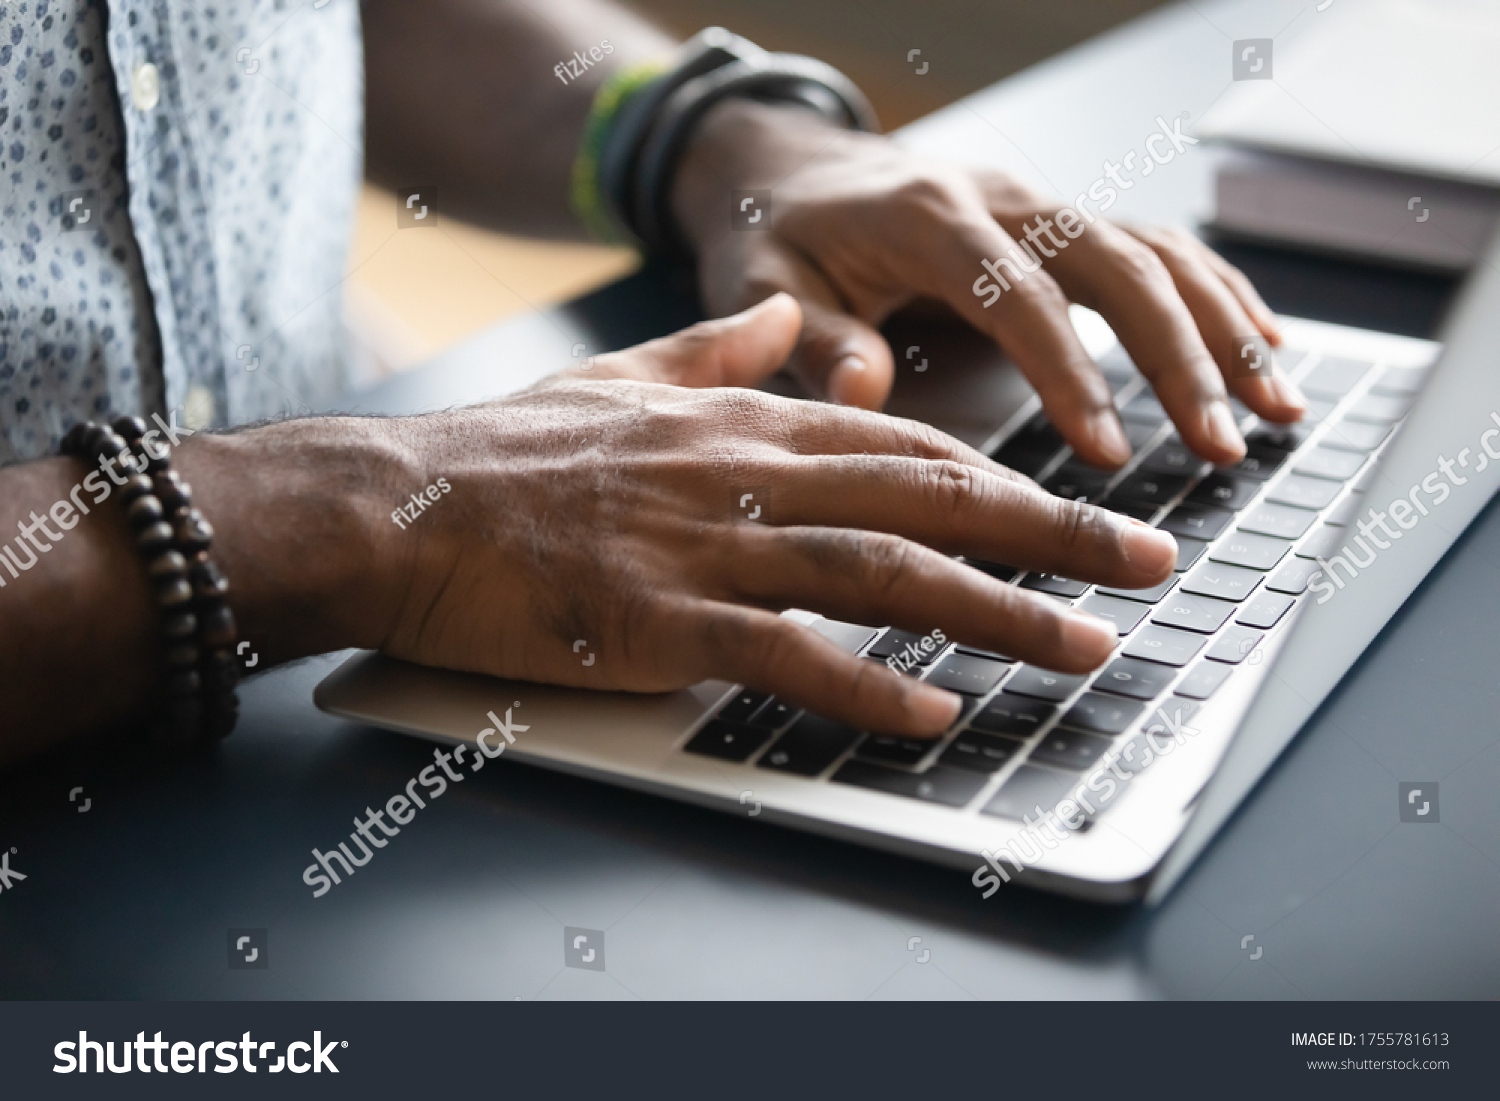 Close up image african male hands typing on laptop keyboard. Businessman answer on client e-mail, customer buying on-line using webshop easy and comfortable services modern wireless tech usage concept #1755781613